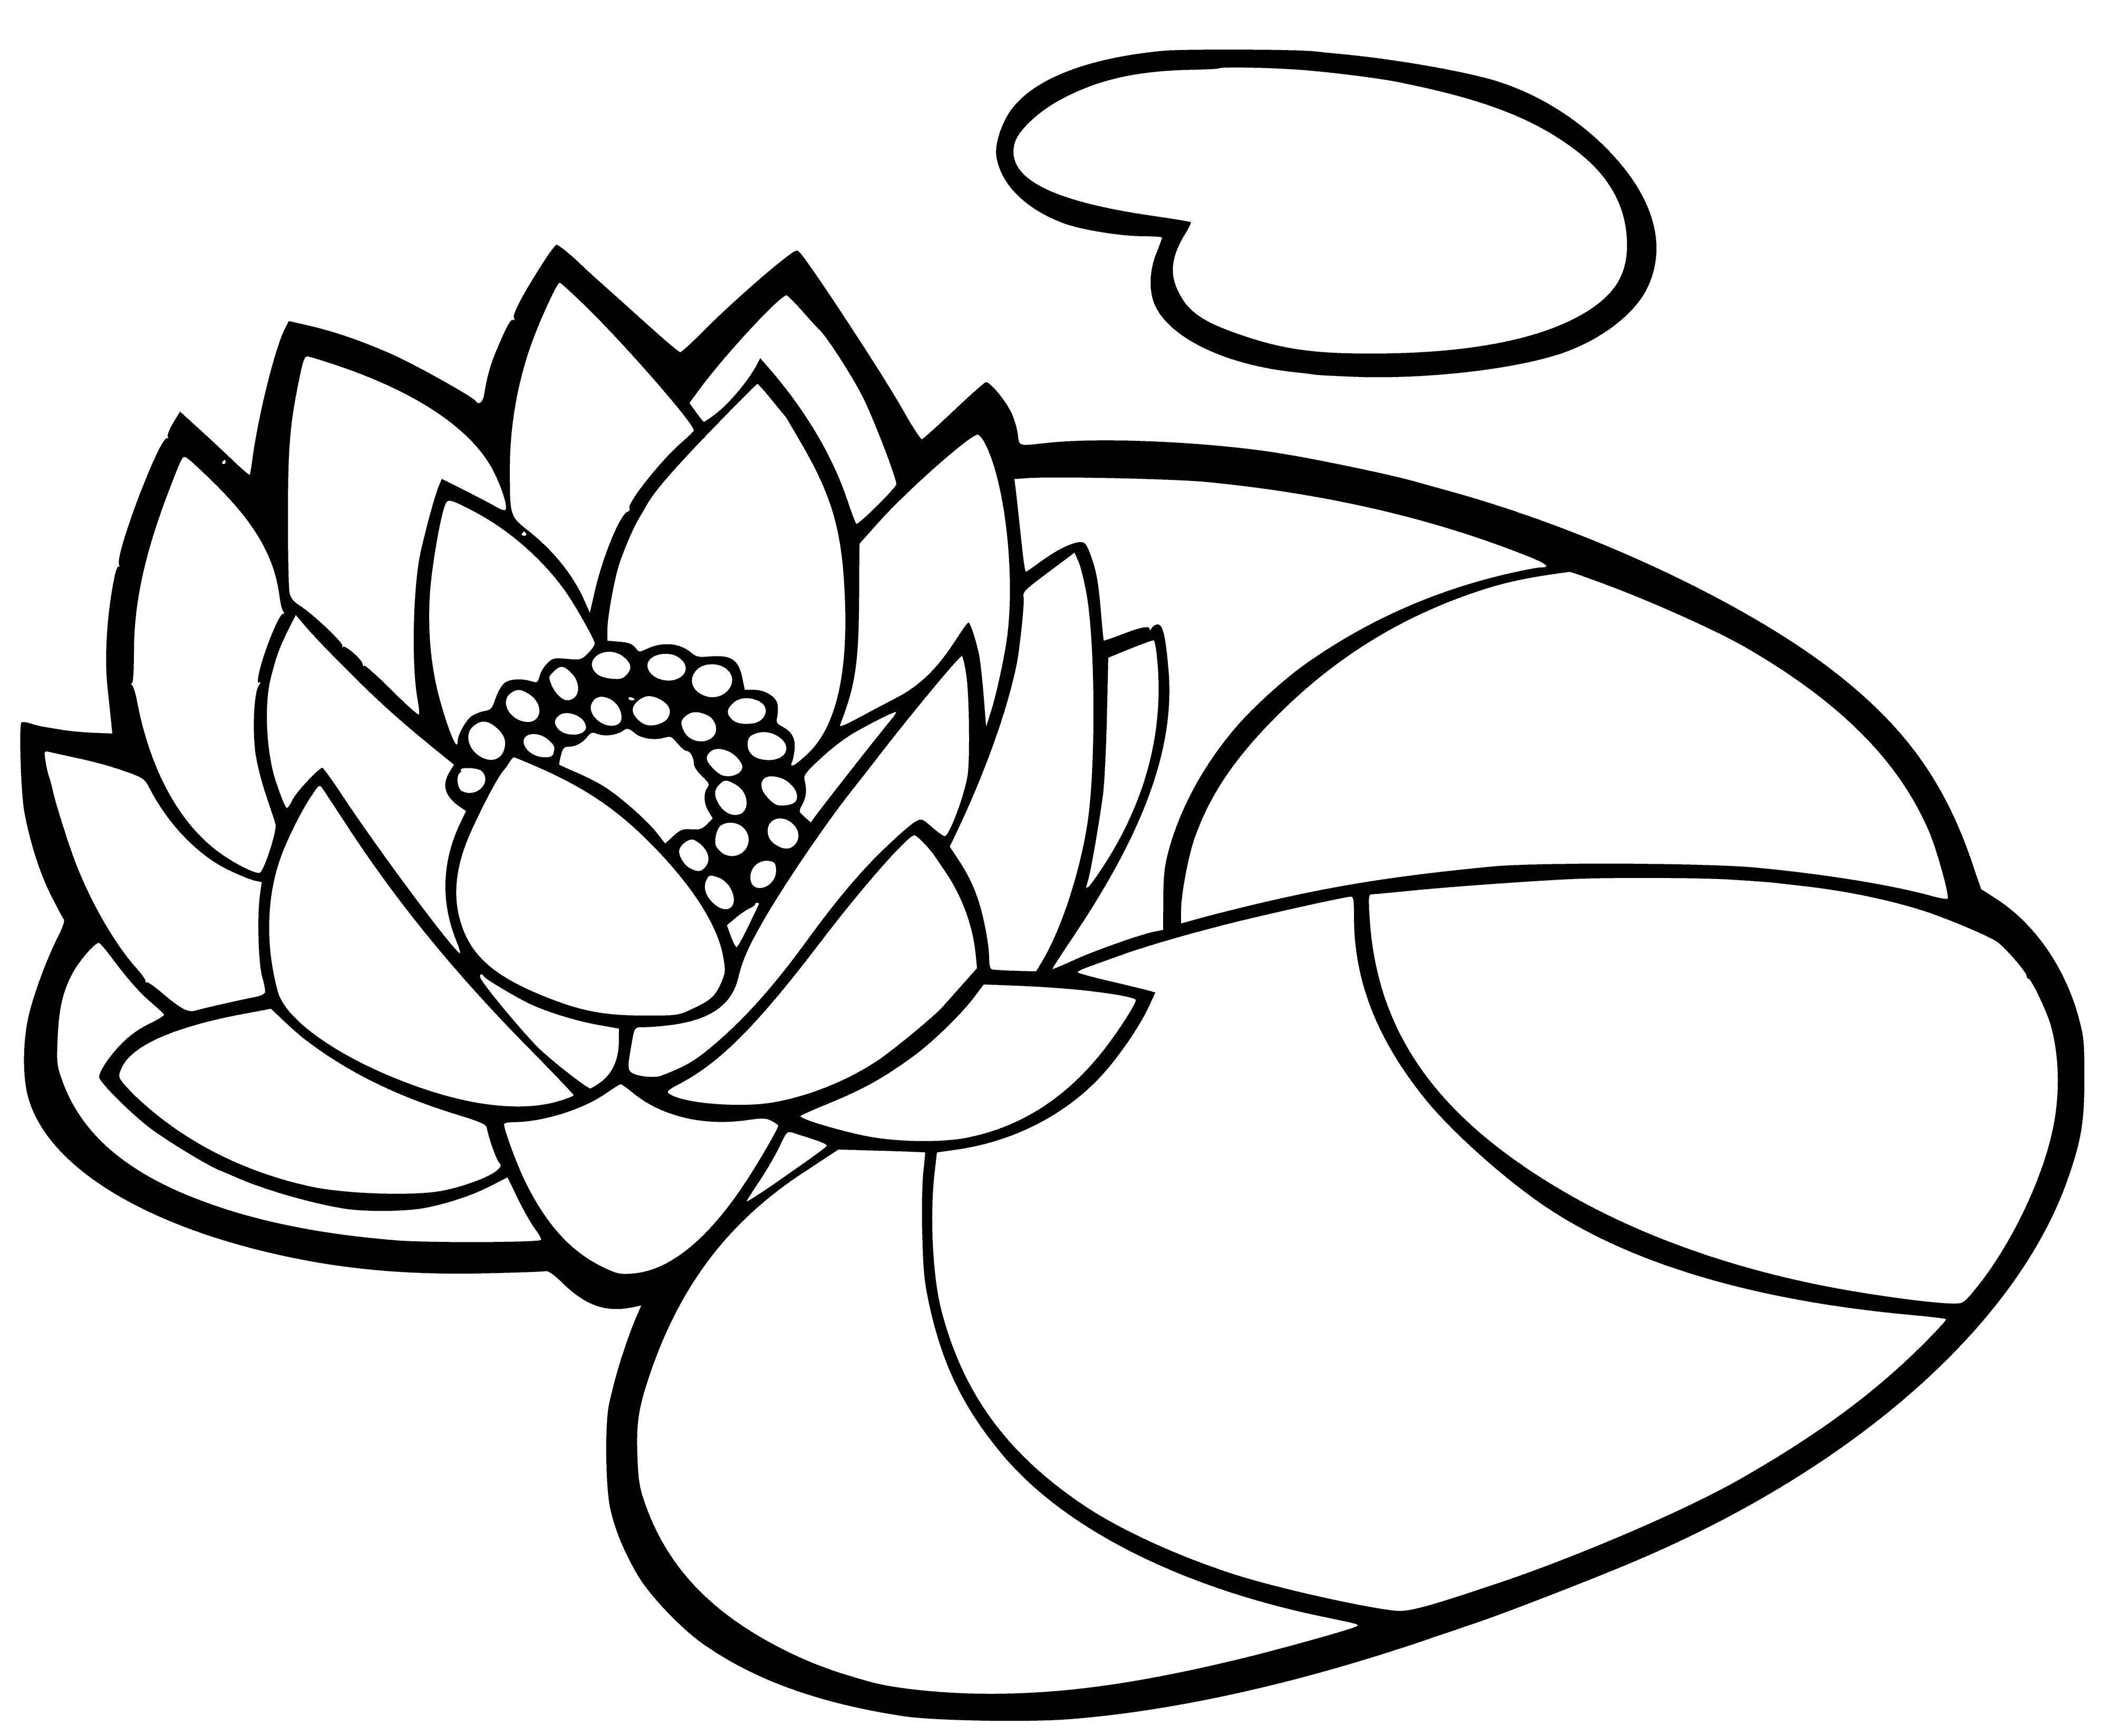 Water lily coloring page